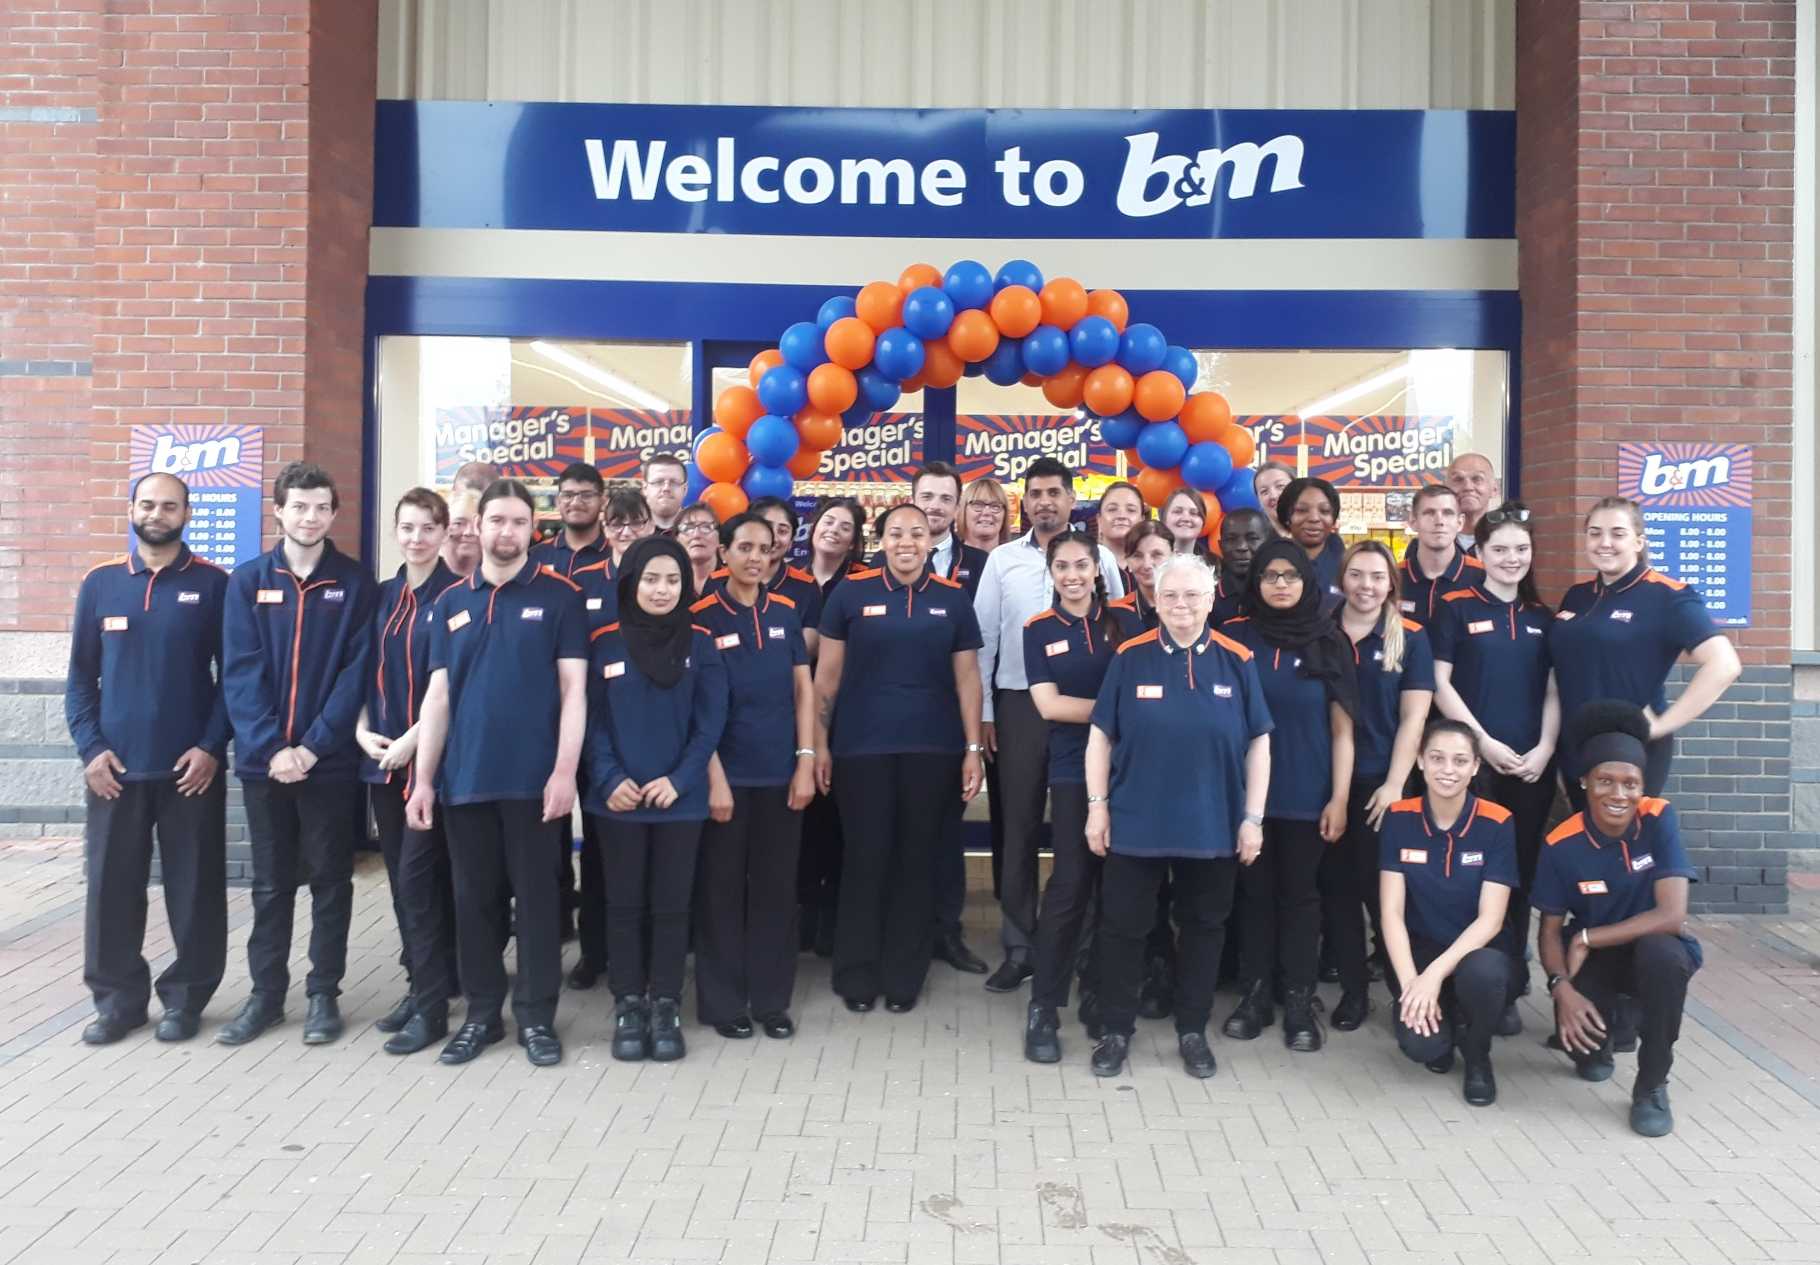 The store team at B&M's newest store in Cottingley, Leeds pose in front of their wonderful new B&M Store, located at Junction 1 Retail Park.